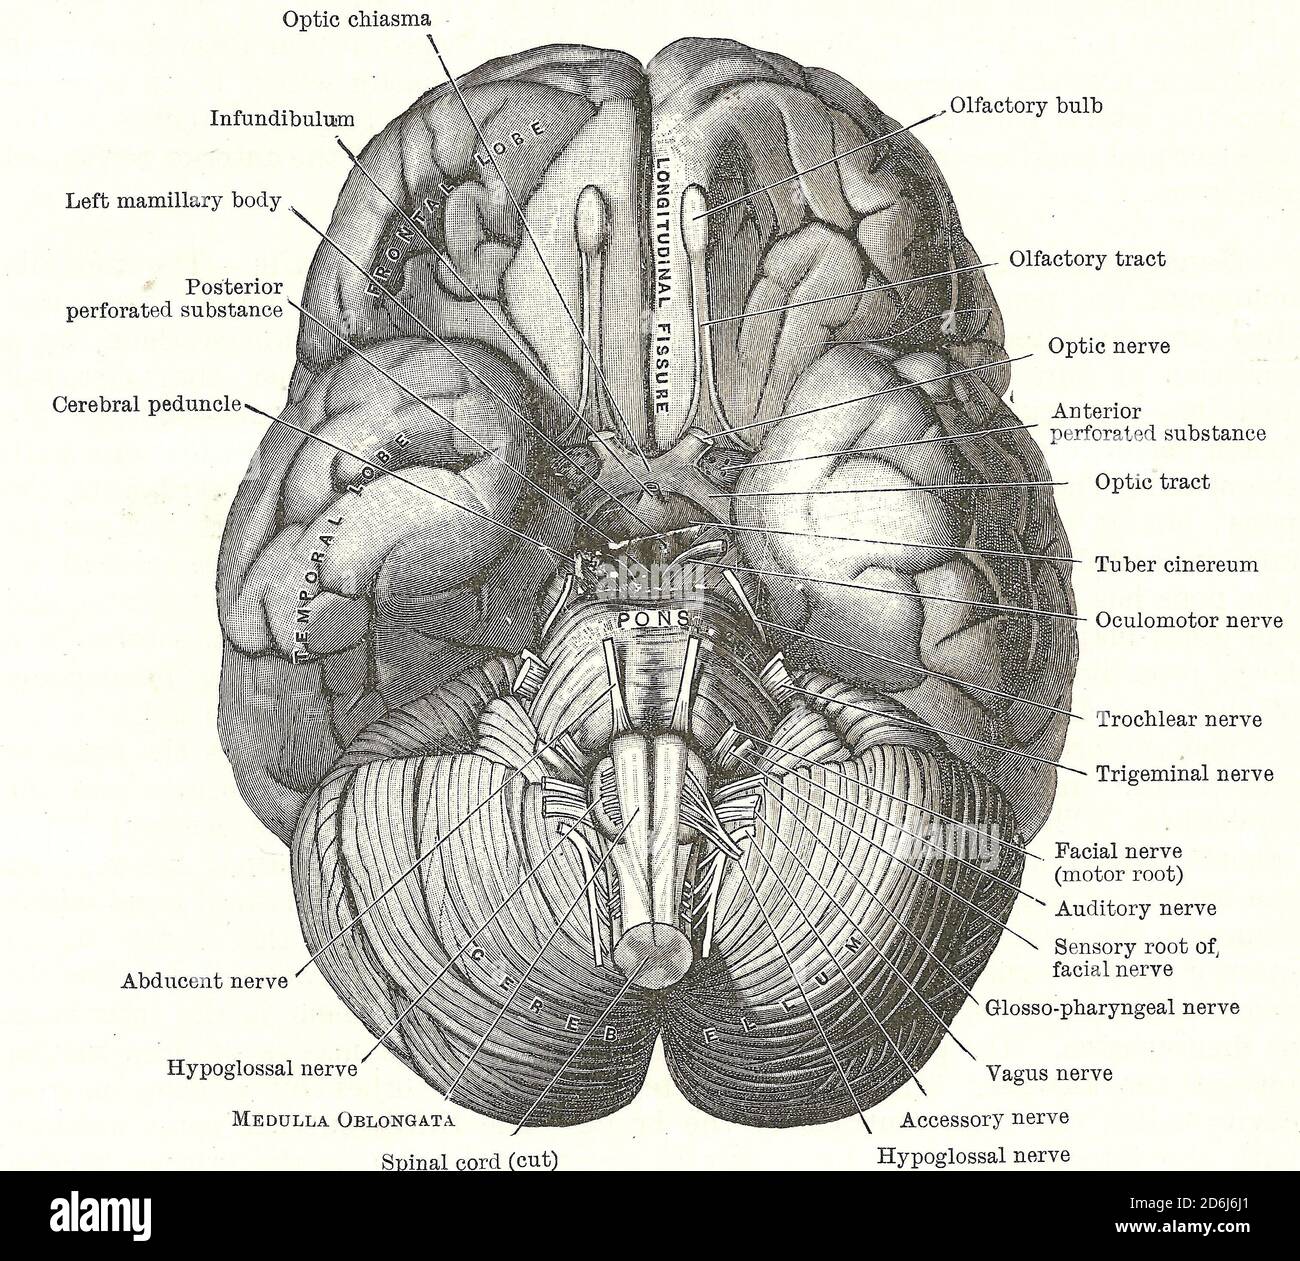 Dissection of the human brain - base of brain and cranial nerves,from an early 20th century anatomy textbook, out of copyright Stock Photo